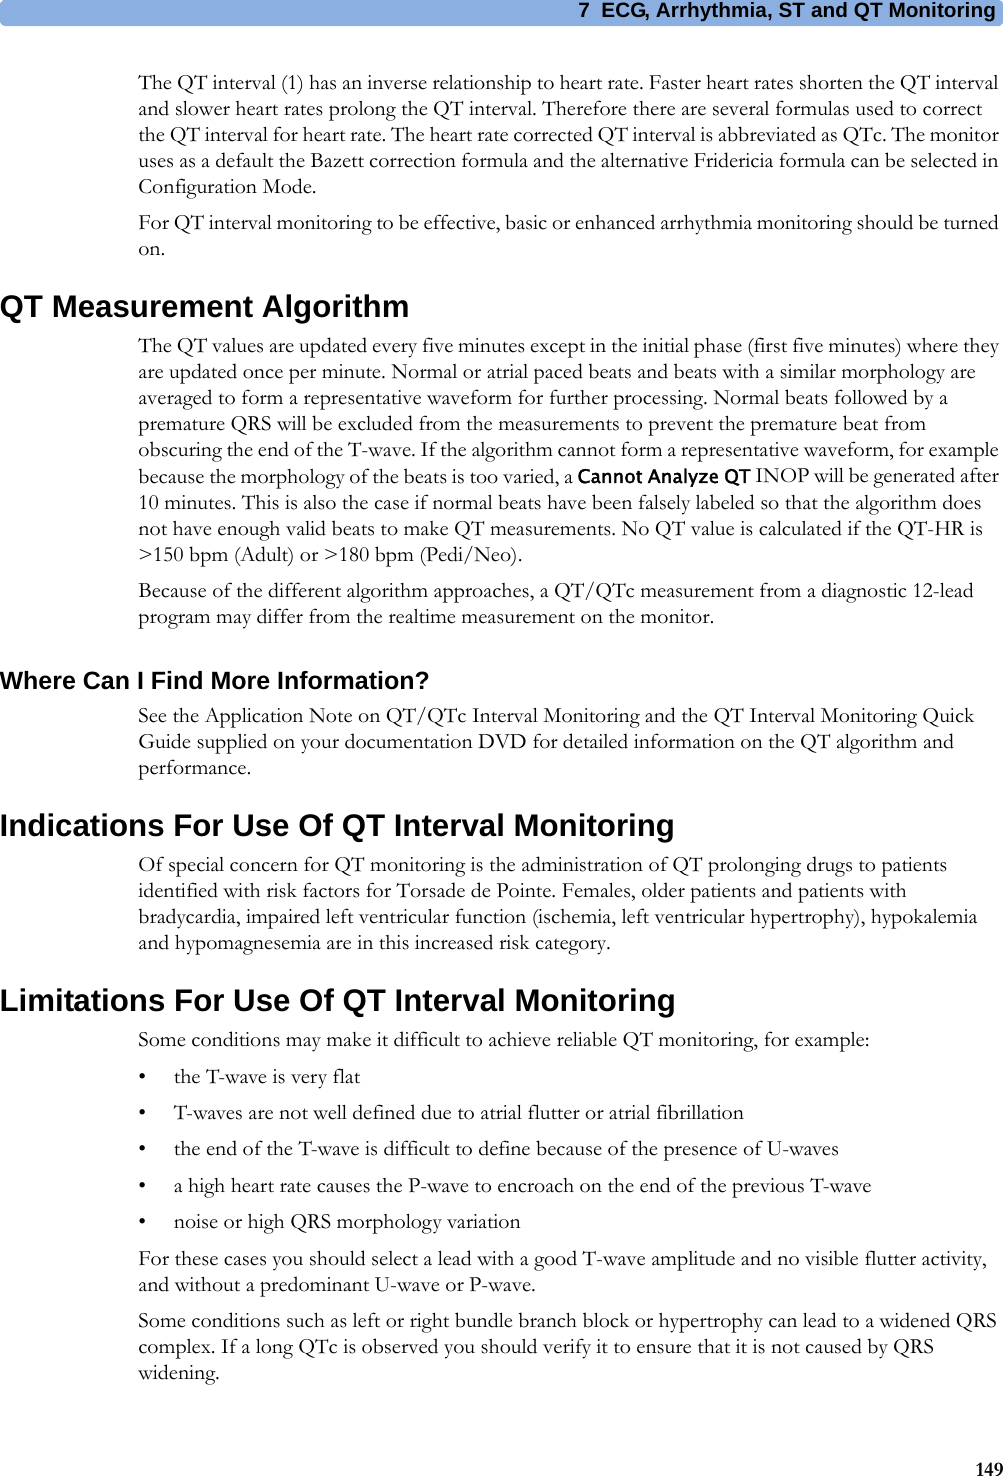 7 ECG, Arrhythmia, ST and QT Monitoring149The QT interval (1) has an inverse relationship to heart rate. Faster heart rates shorten the QT interval and slower heart rates prolong the QT interval. Therefore there are several formulas used to correct the QT interval for heart rate. The heart rate corrected QT interval is abbreviated as QTc. The monitor uses as a default the Bazett correction formula and the alternative Fridericia formula can be selected in Configuration Mode.For QT interval monitoring to be effective, basic or enhanced arrhythmia monitoring should be turned on.QT Measurement AlgorithmThe QT values are updated every five minutes except in the initial phase (first five minutes) where they are updated once per minute. Normal or atrial paced beats and beats with a similar morphology are averaged to form a representative waveform for further processing. Normal beats followed by a premature QRS will be excluded from the measurements to prevent the premature beat from obscuring the end of the T-wave. If the algorithm cannot form a representative waveform, for example because the morphology of the beats is too varied, a Cannot Analyze QT INOP will be generated after 10 minutes. This is also the case if normal beats have been falsely labeled so that the algorithm does not have enough valid beats to make QT measurements. No QT value is calculated if the QT-HR is &gt;150 bpm (Adult) or &gt;180 bpm (Pedi/Neo).Because of the different algorithm approaches, a QT/QTc measurement from a diagnostic 12-lead program may differ from the realtime measurement on the monitor.Where Can I Find More Information?See the Application Note on QT/QTc Interval Monitoring and the QT Interval Monitoring Quick Guide supplied on your documentation DVD for detailed information on the QT algorithm and performance.Indications For Use Of QT Interval MonitoringOf special concern for QT monitoring is the administration of QT prolonging drugs to patients identified with risk factors for Torsade de Pointe. Females, older patients and patients with bradycardia, impaired left ventricular function (ischemia, left ventricular hypertrophy), hypokalemia and hypomagnesemia are in this increased risk category.Limitations For Use Of QT Interval MonitoringSome conditions may make it difficult to achieve reliable QT monitoring, for example:• the T-wave is very flat• T-waves are not well defined due to atrial flutter or atrial fibrillation• the end of the T-wave is difficult to define because of the presence of U-waves• a high heart rate causes the P-wave to encroach on the end of the previous T-wave• noise or high QRS morphology variationFor these cases you should select a lead with a good T-wave amplitude and no visible flutter activity, and without a predominant U-wave or P-wave.Some conditions such as left or right bundle branch block or hypertrophy can lead to a widened QRS complex. If a long QTc is observed you should verify it to ensure that it is not caused by QRS widening.